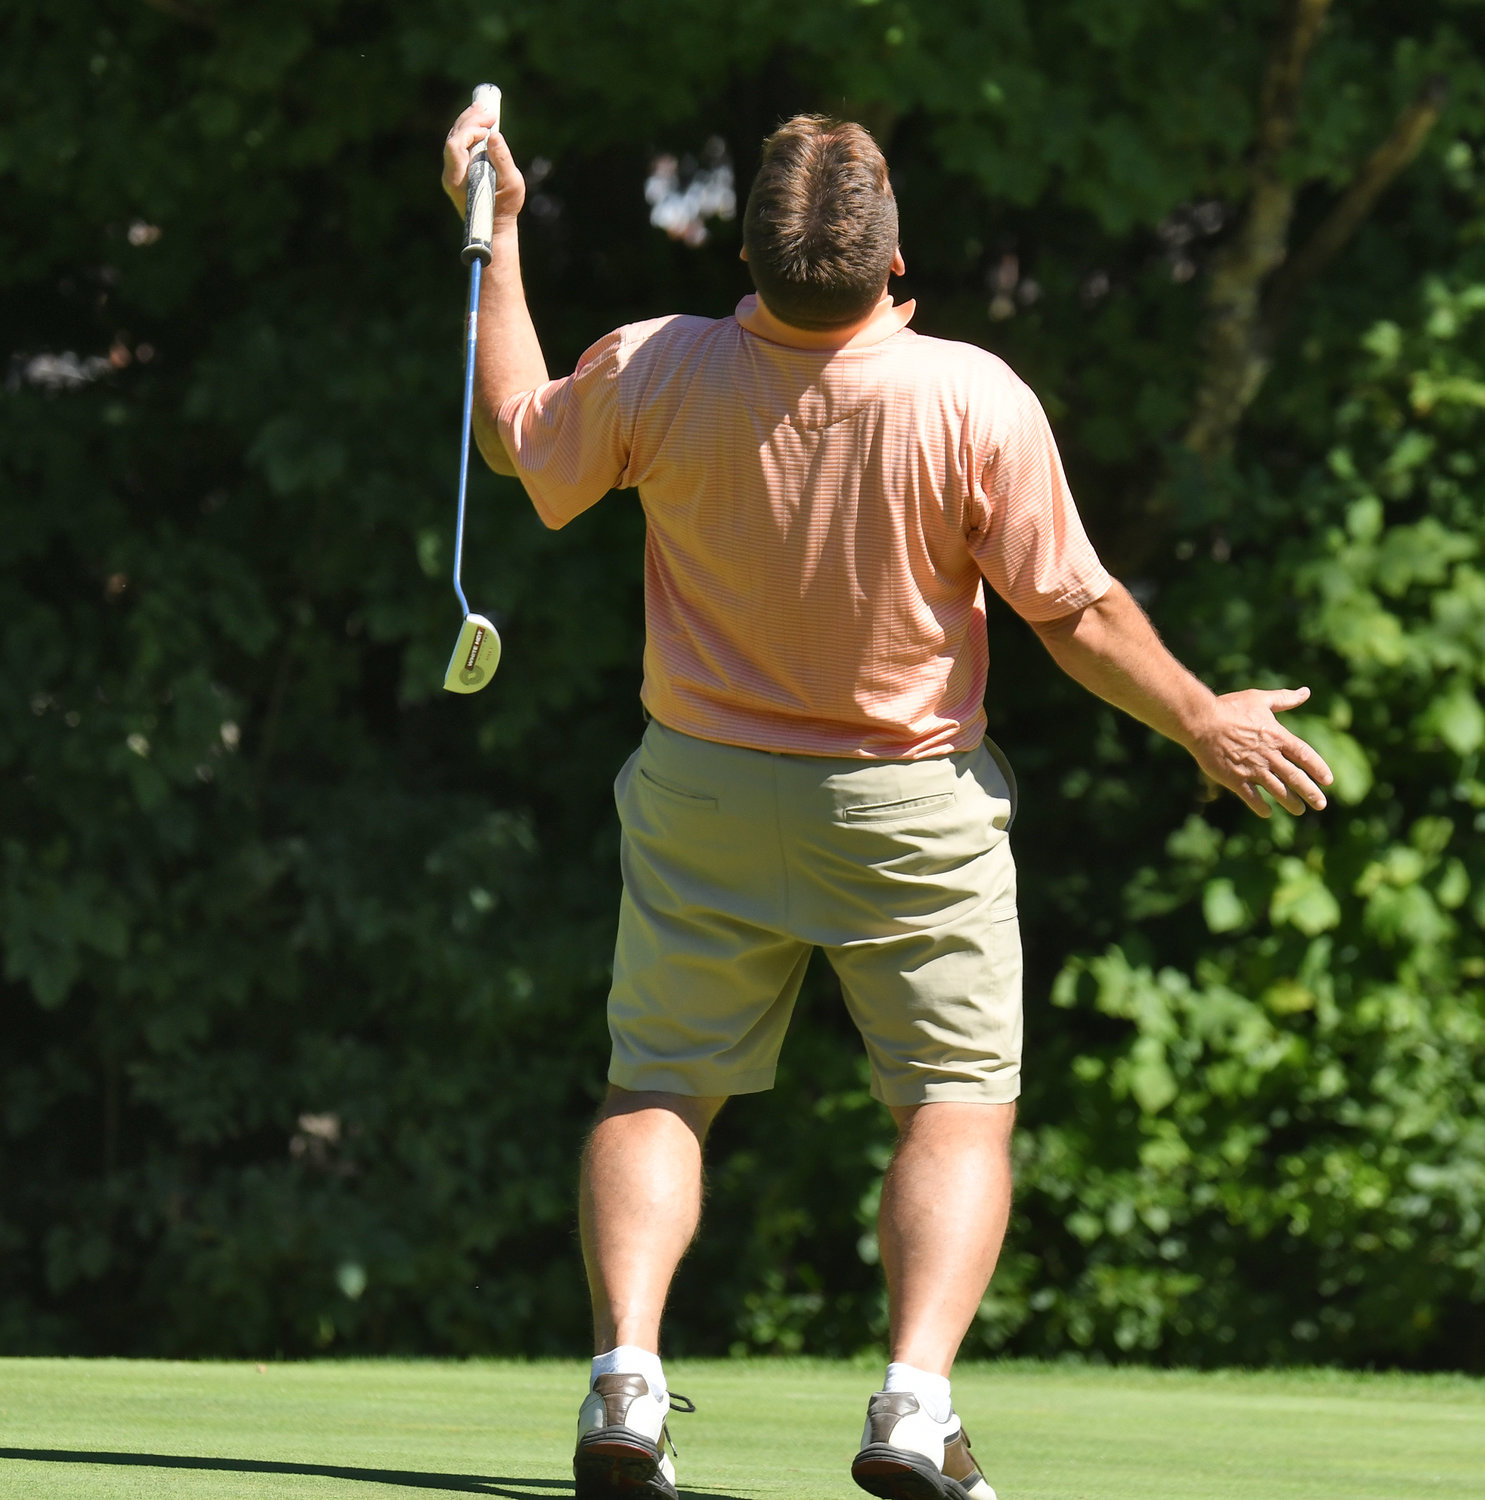 Bruce Miller reacts to missing a birdie putt on the par 5 15th hole on Sunday afternoon at McConnellsville Country Club during the final round of the Rome City Men's Amateur Golf Championship. Miller finished third with a two-day score of 156.